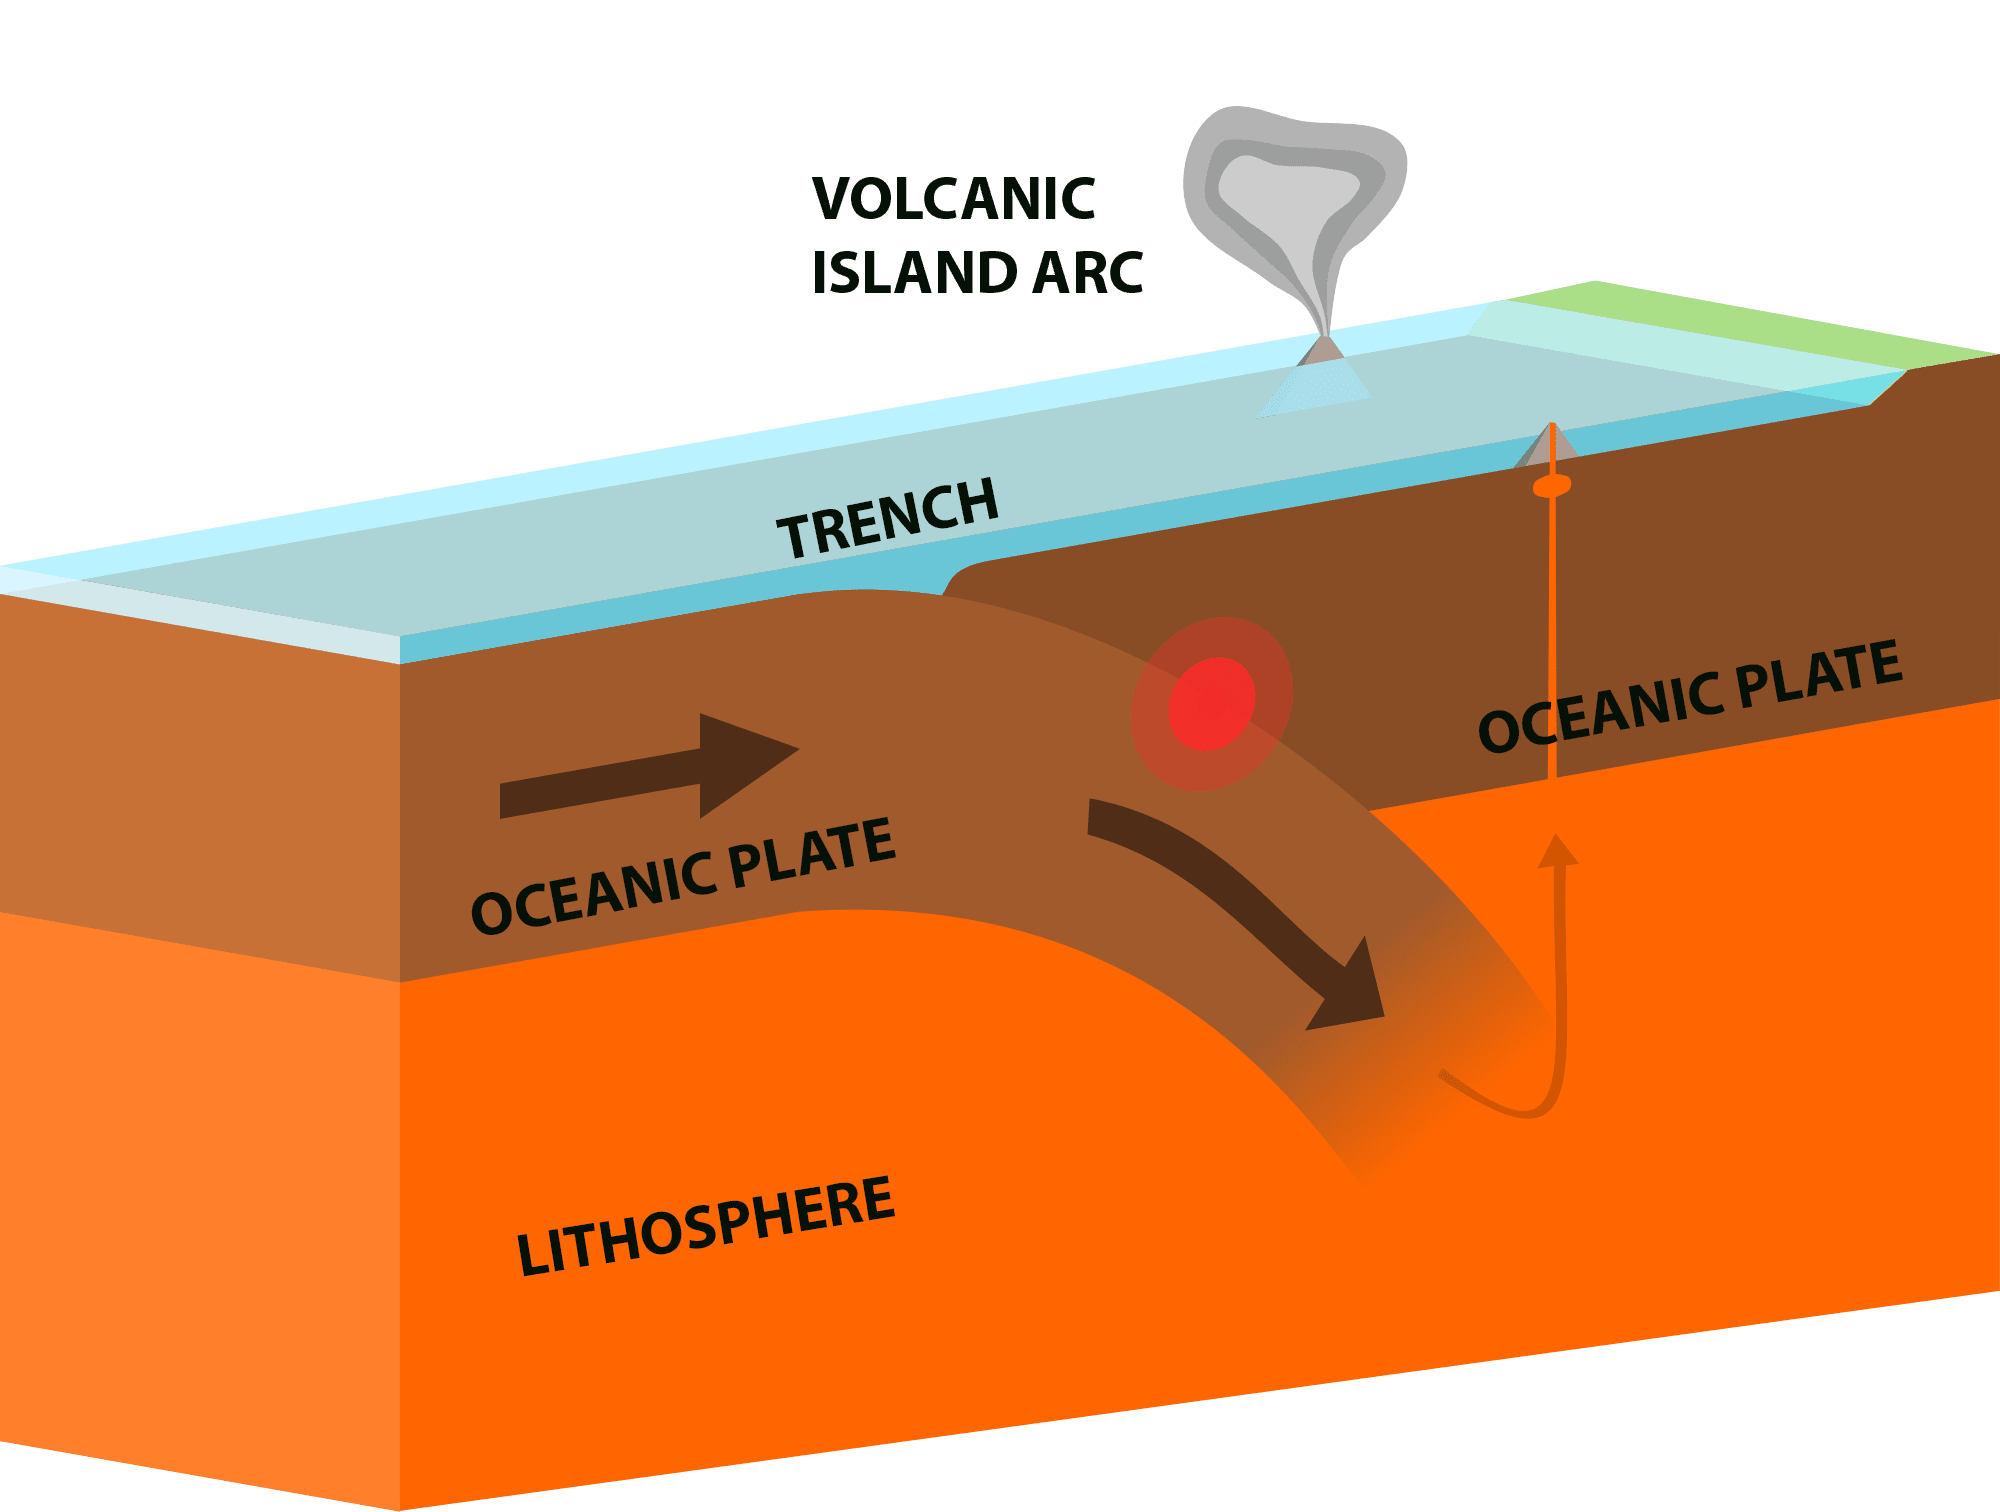 Converging plates with subduction zone